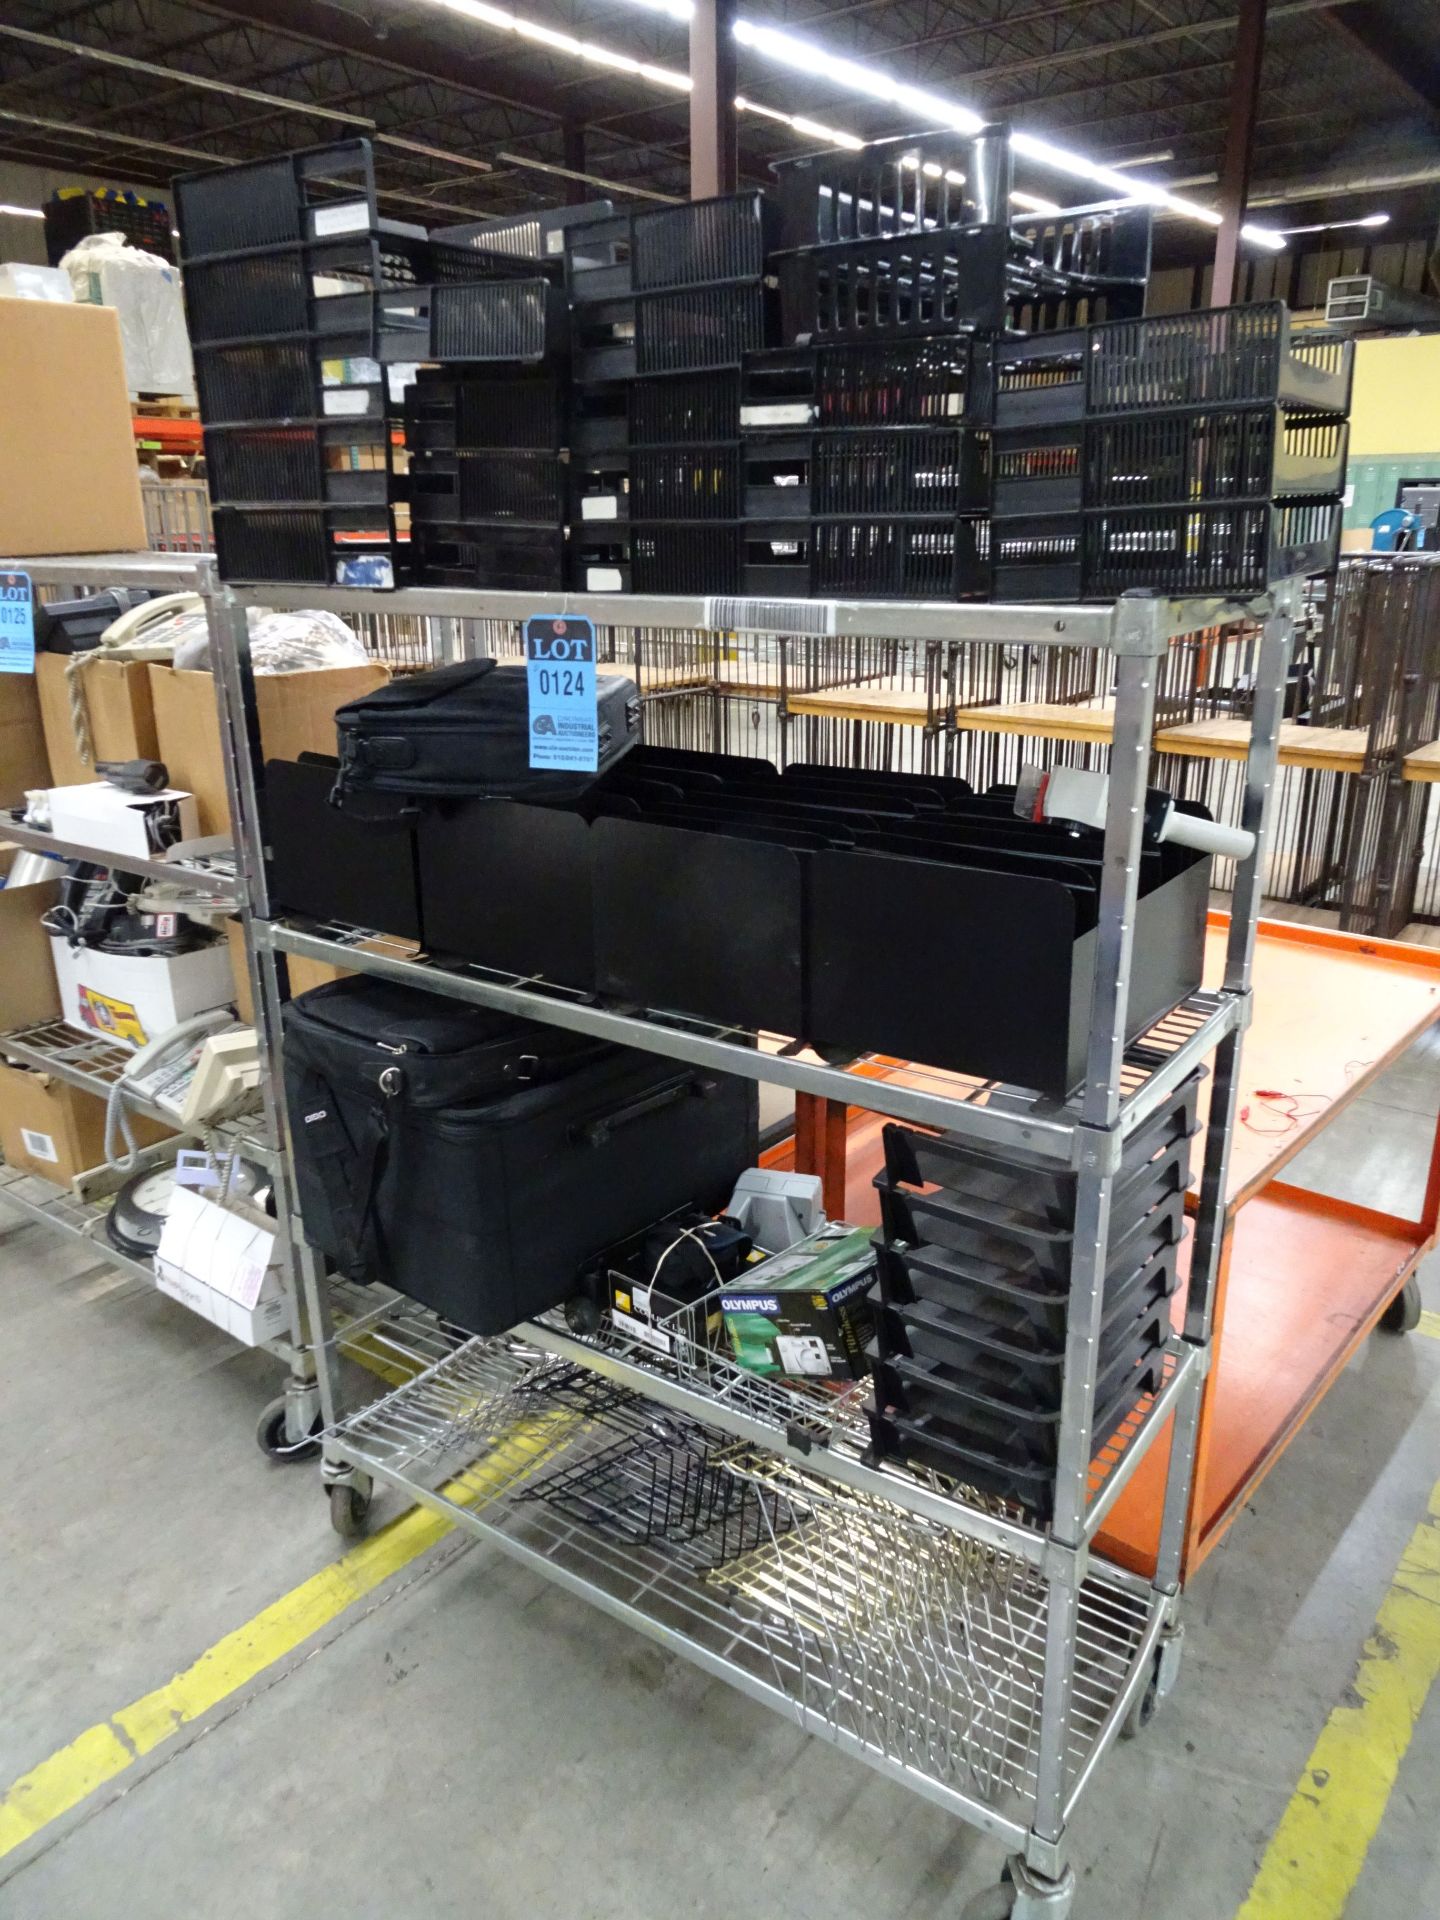 (LOT) METRO CART WITH OFFICE SUPPLIES